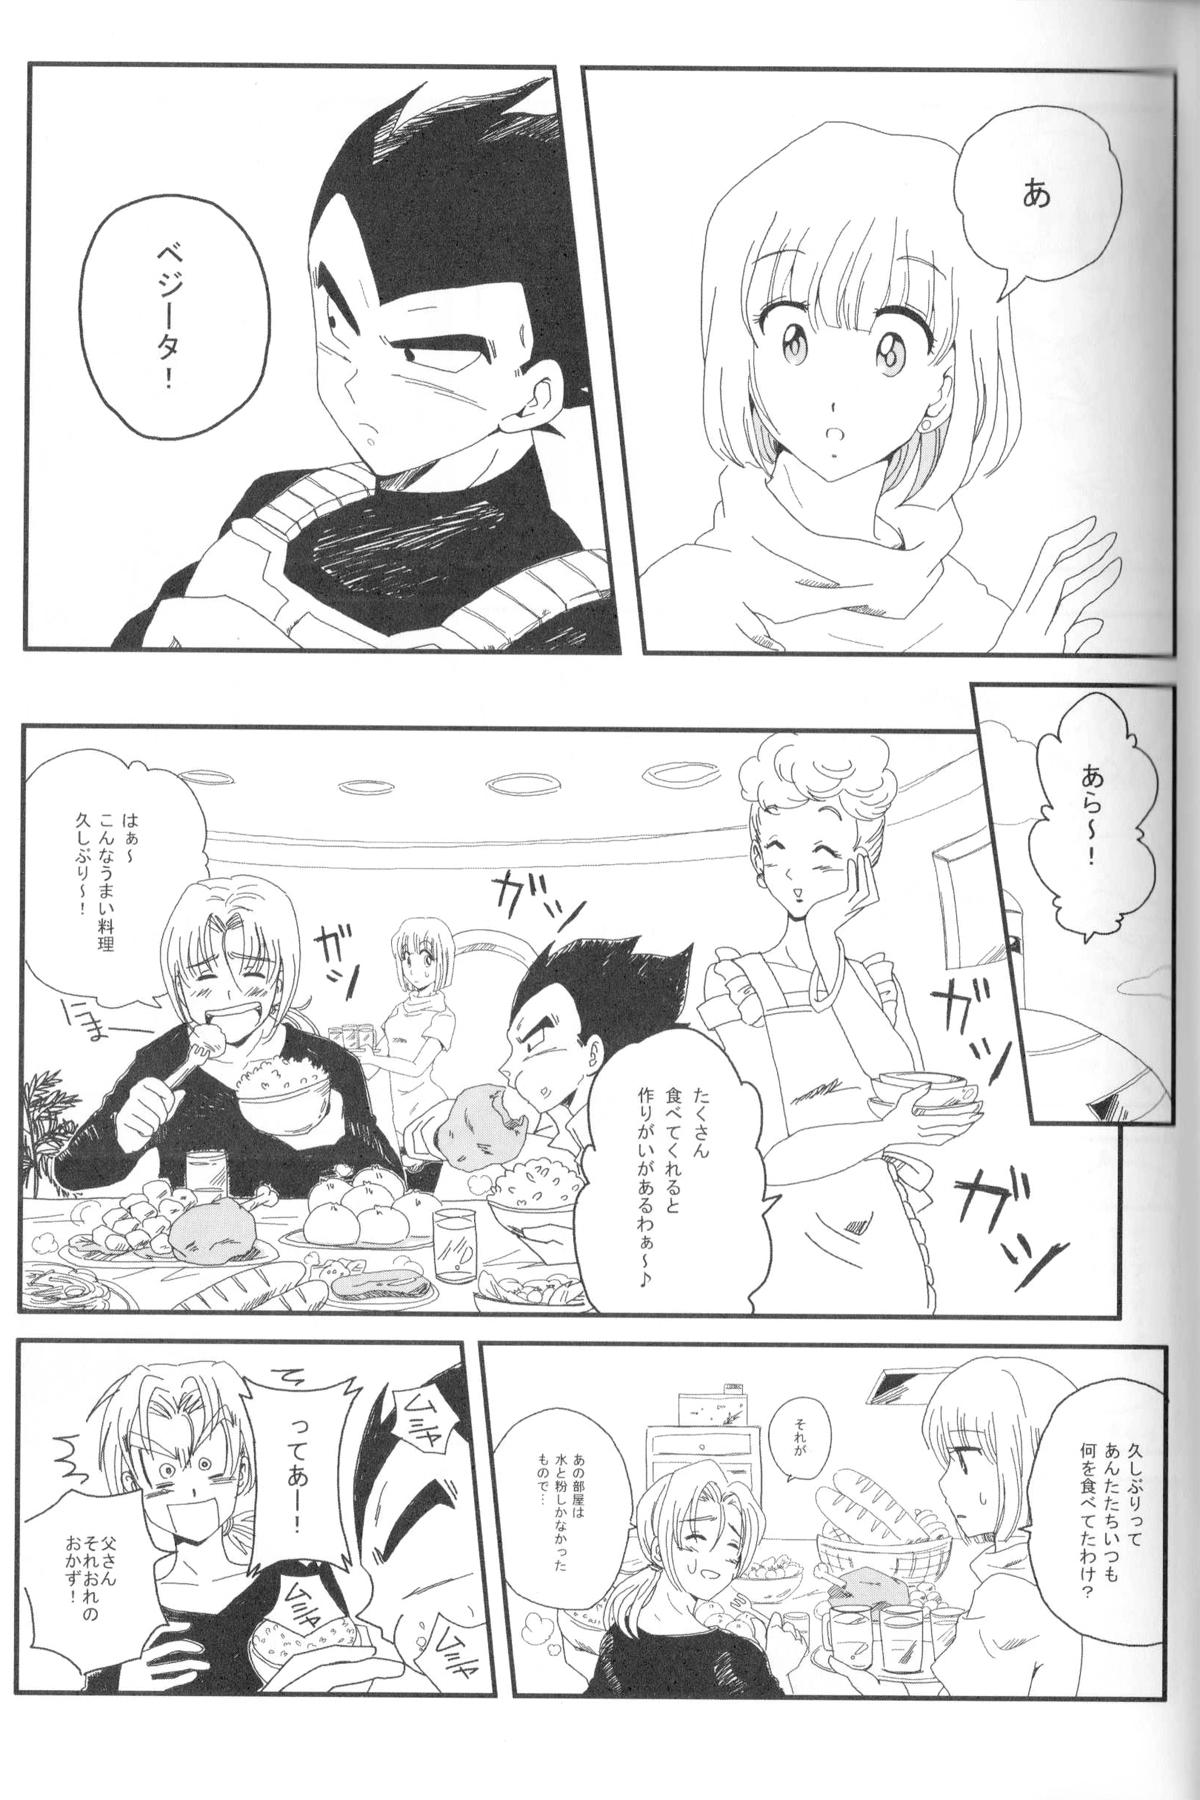 T Girl Pure Love - Dragon ball z Spain - Page 4